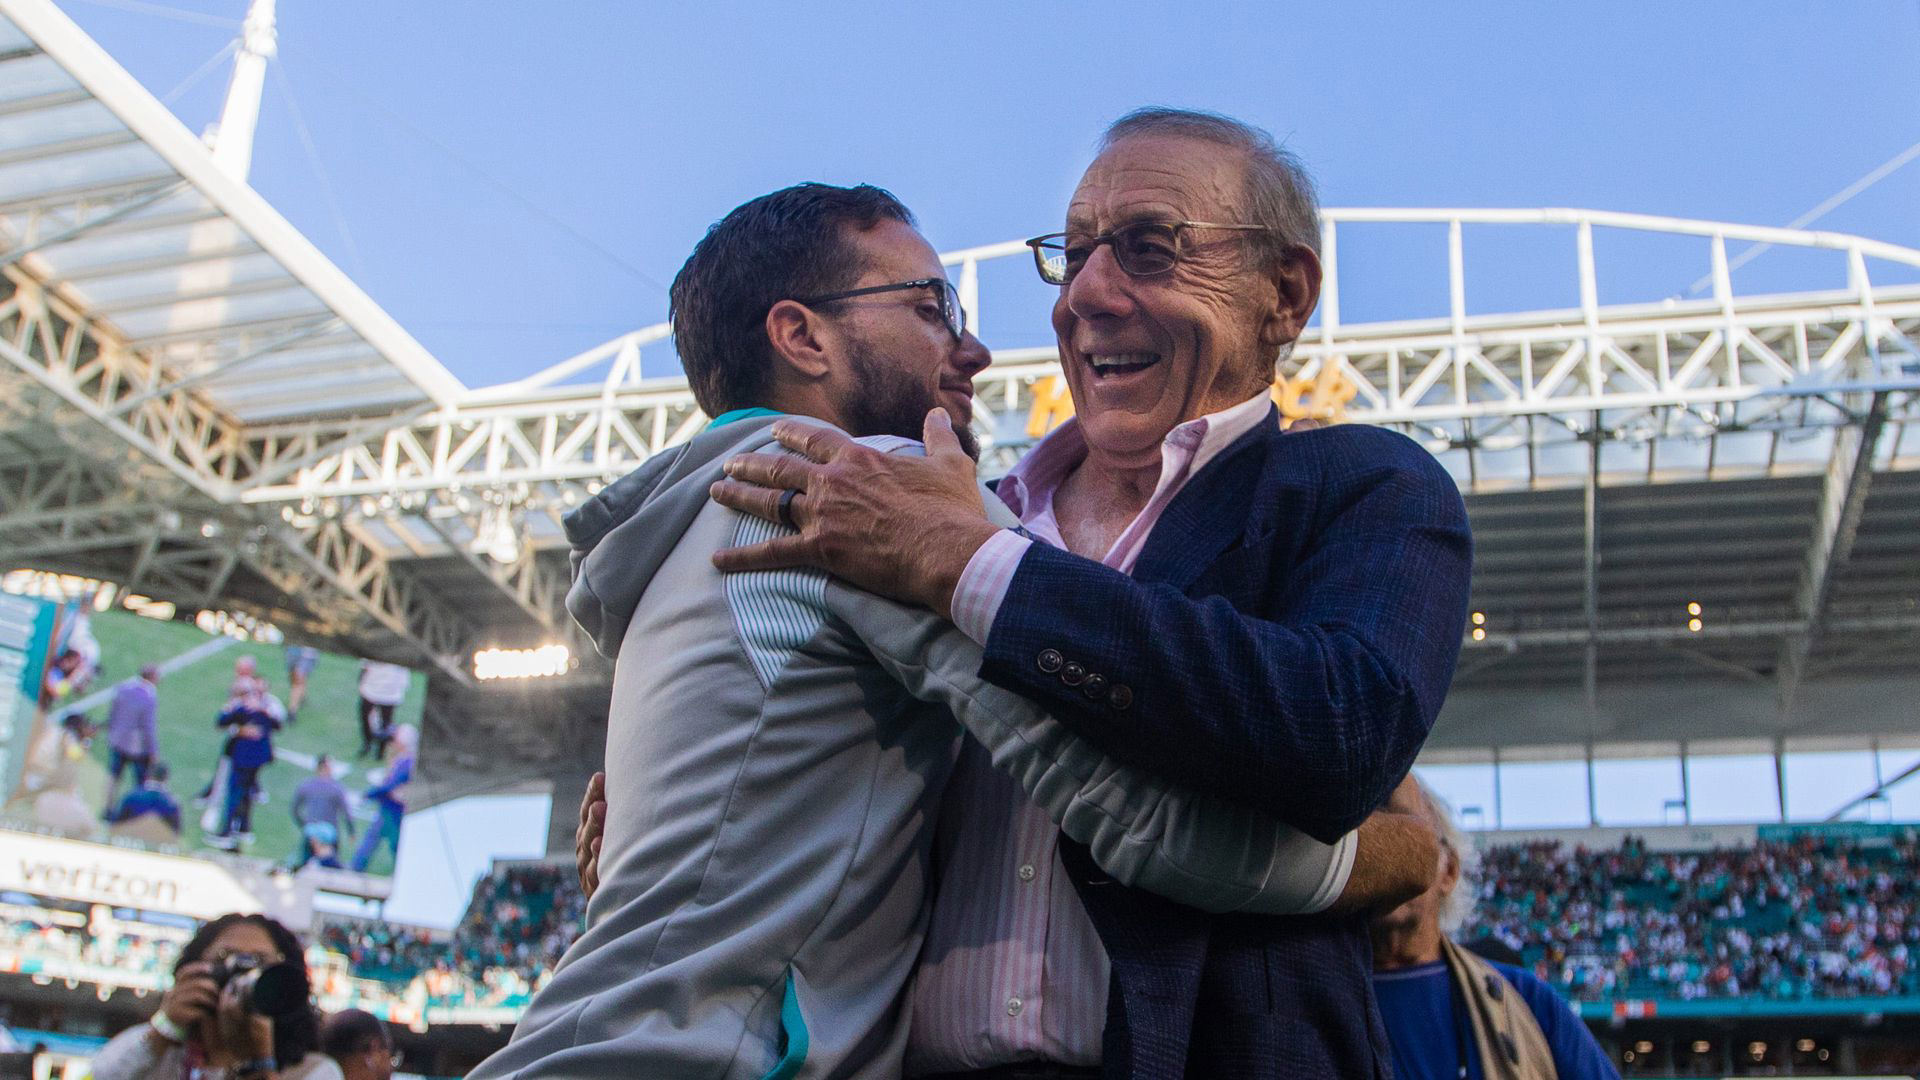 NFL News: Stephen Ross Turns Down $10,000,000,000. Bid To Maintain Control Of Miami Dolphins,Hard Rock Stadium And Miami Grand Prix Rights